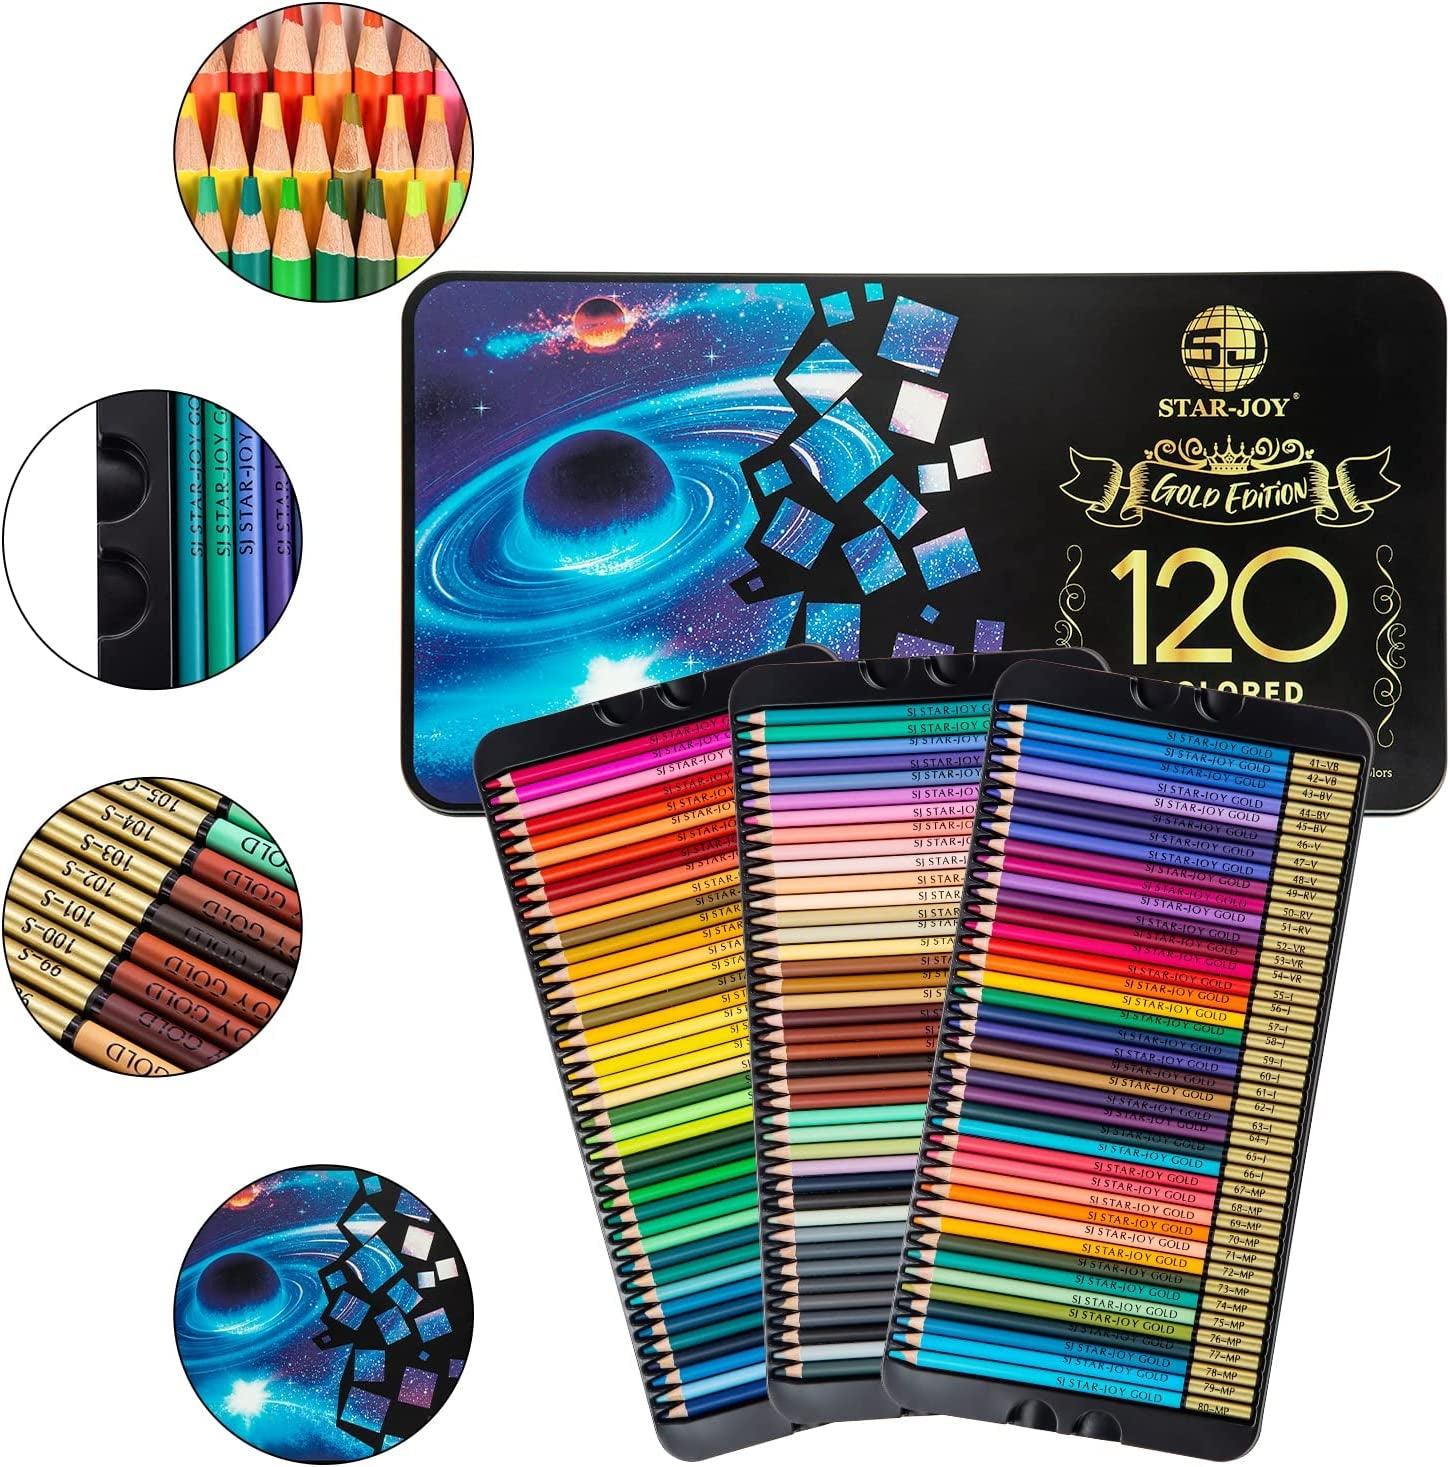 48 Color Colored Pencils, Suitable for Adults, Kids and Coloring